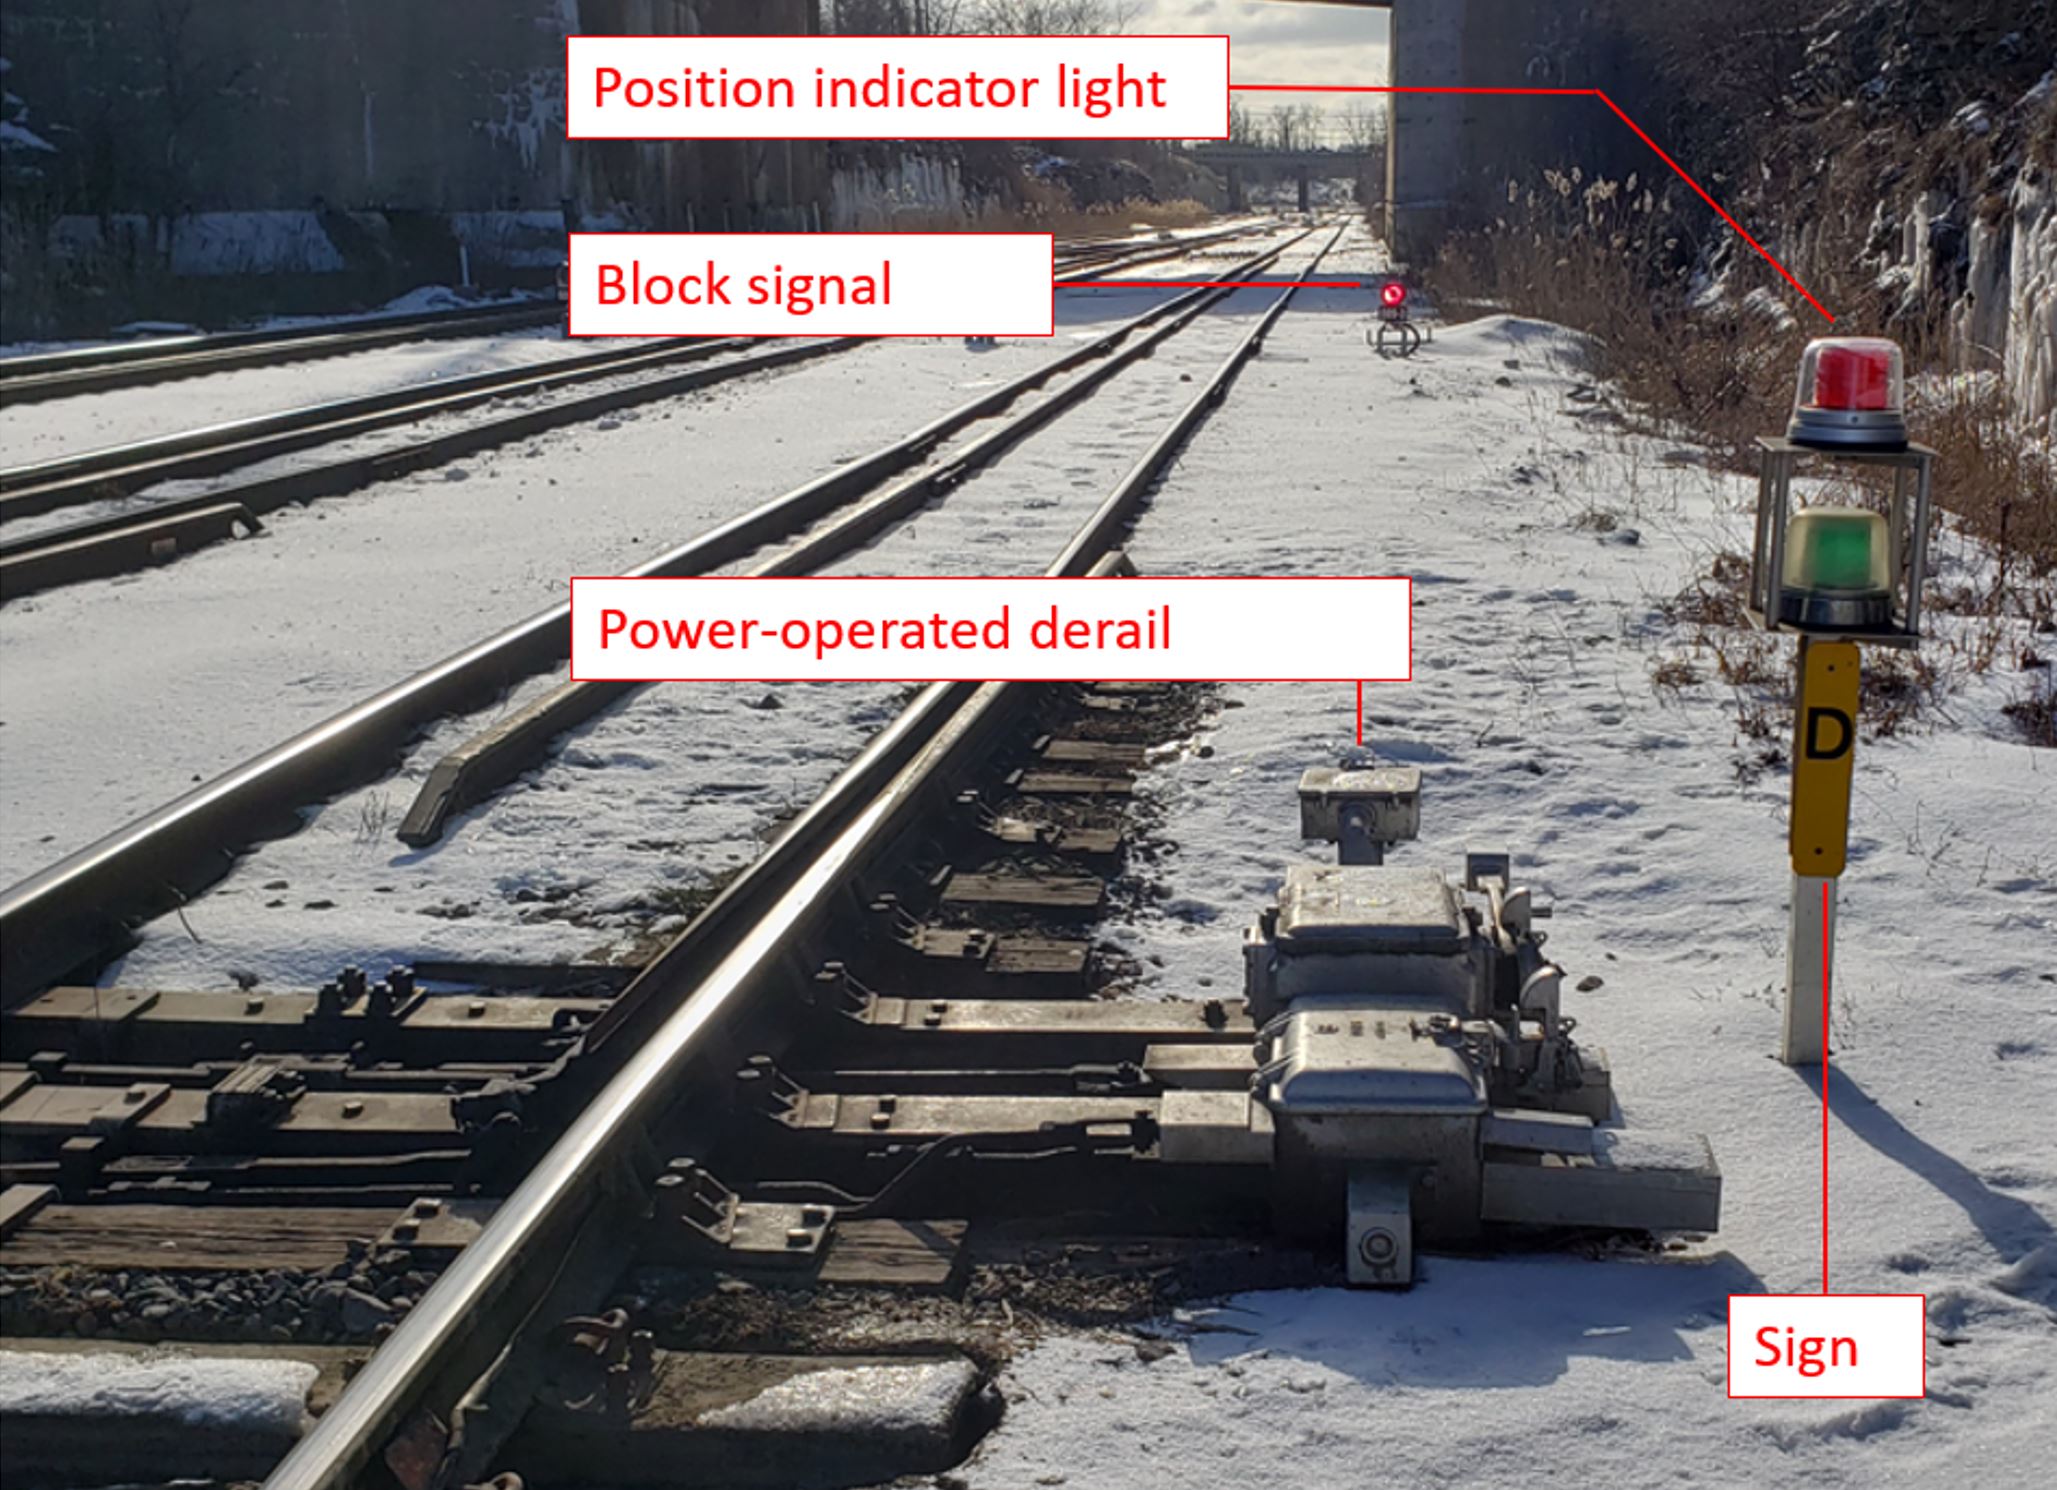 Example of a power-operated derail equipped with a position indicator light and a sign (Source: TSB)